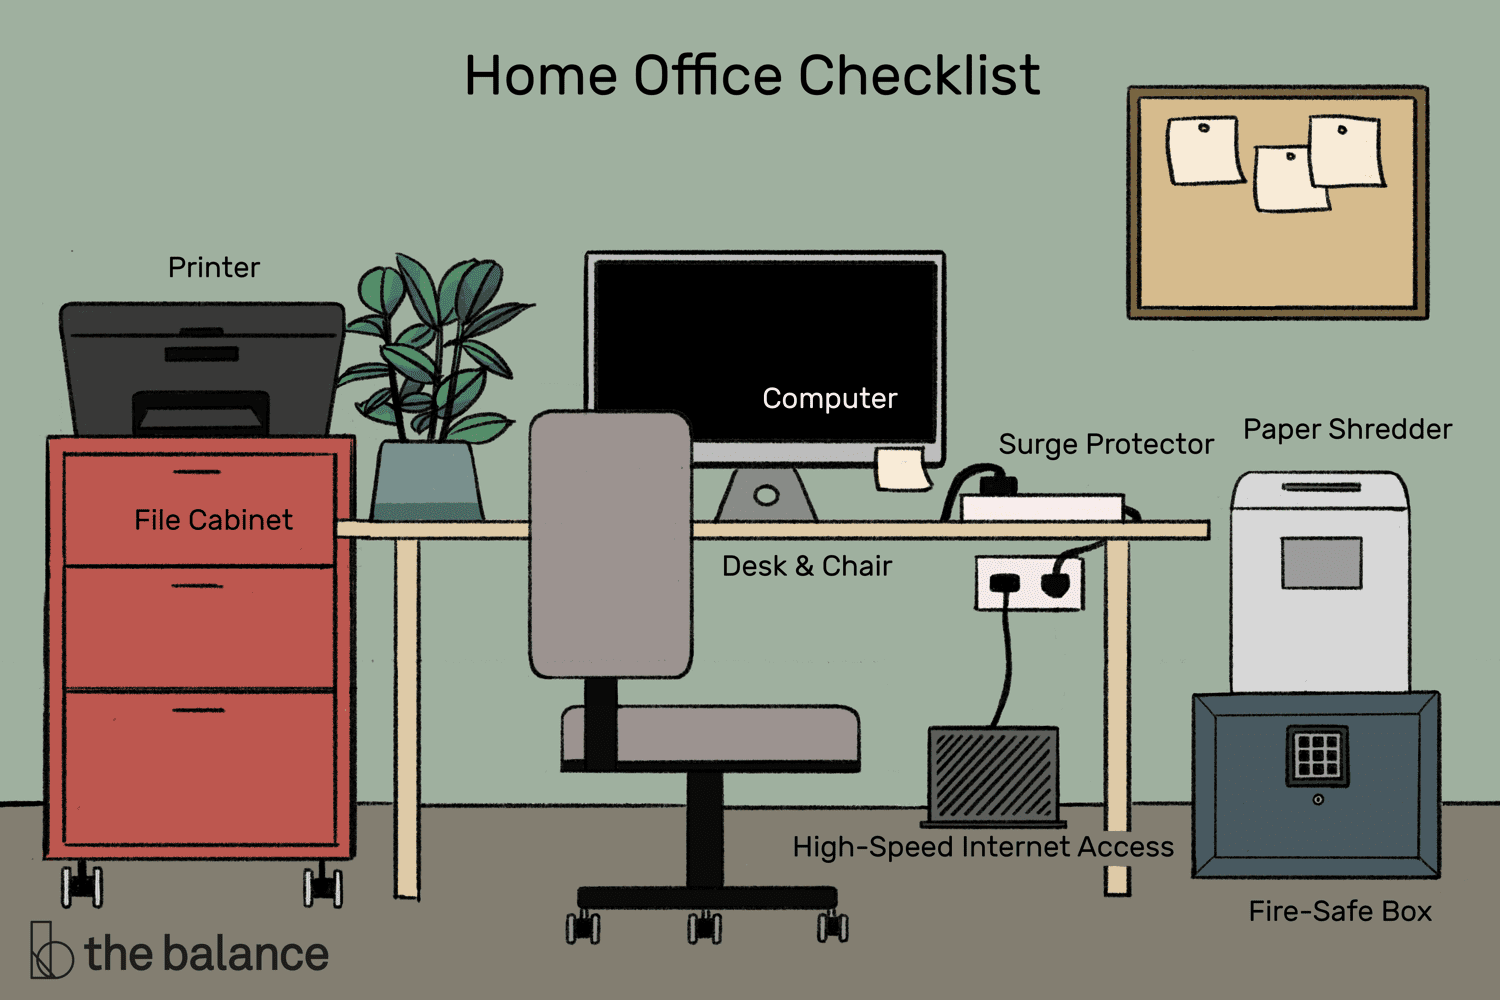 a-checklist-for-setting-up-your-home-office-2951767-final-40e0e34b4a1e48e8acee84eefe44b648.png